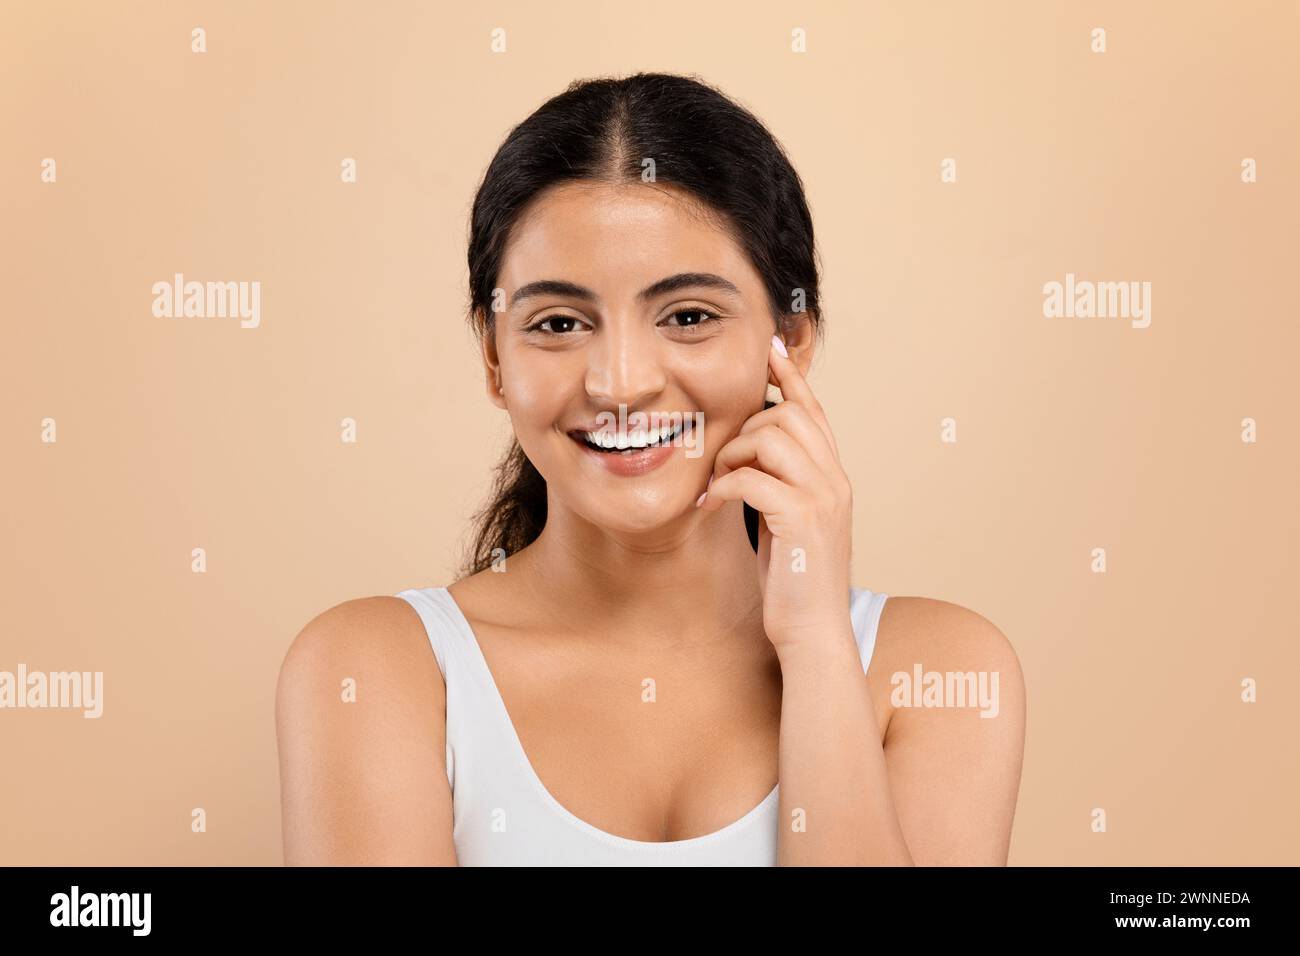 Cheerful indian woman in white top touching her face with gentle smile Stock Photo